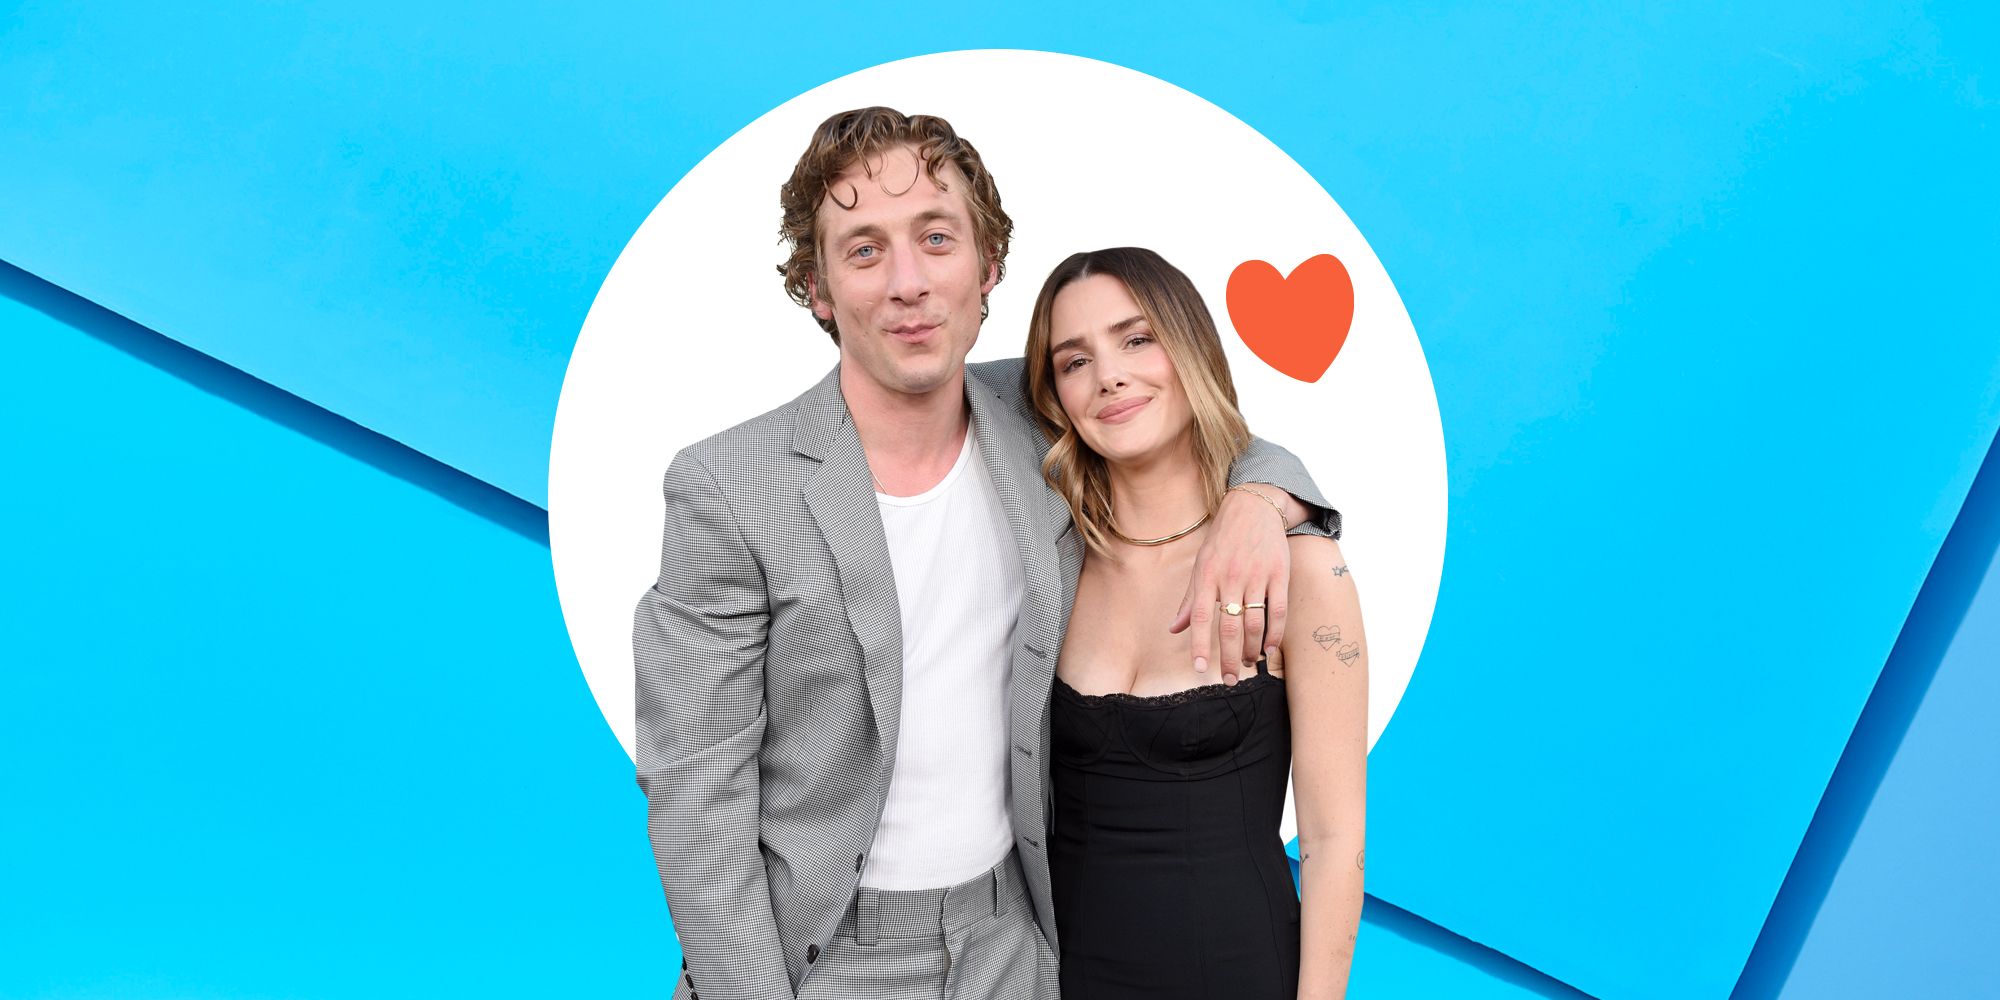 Jeremy Allen White And Wife Addison Timlins Body Language, Explained